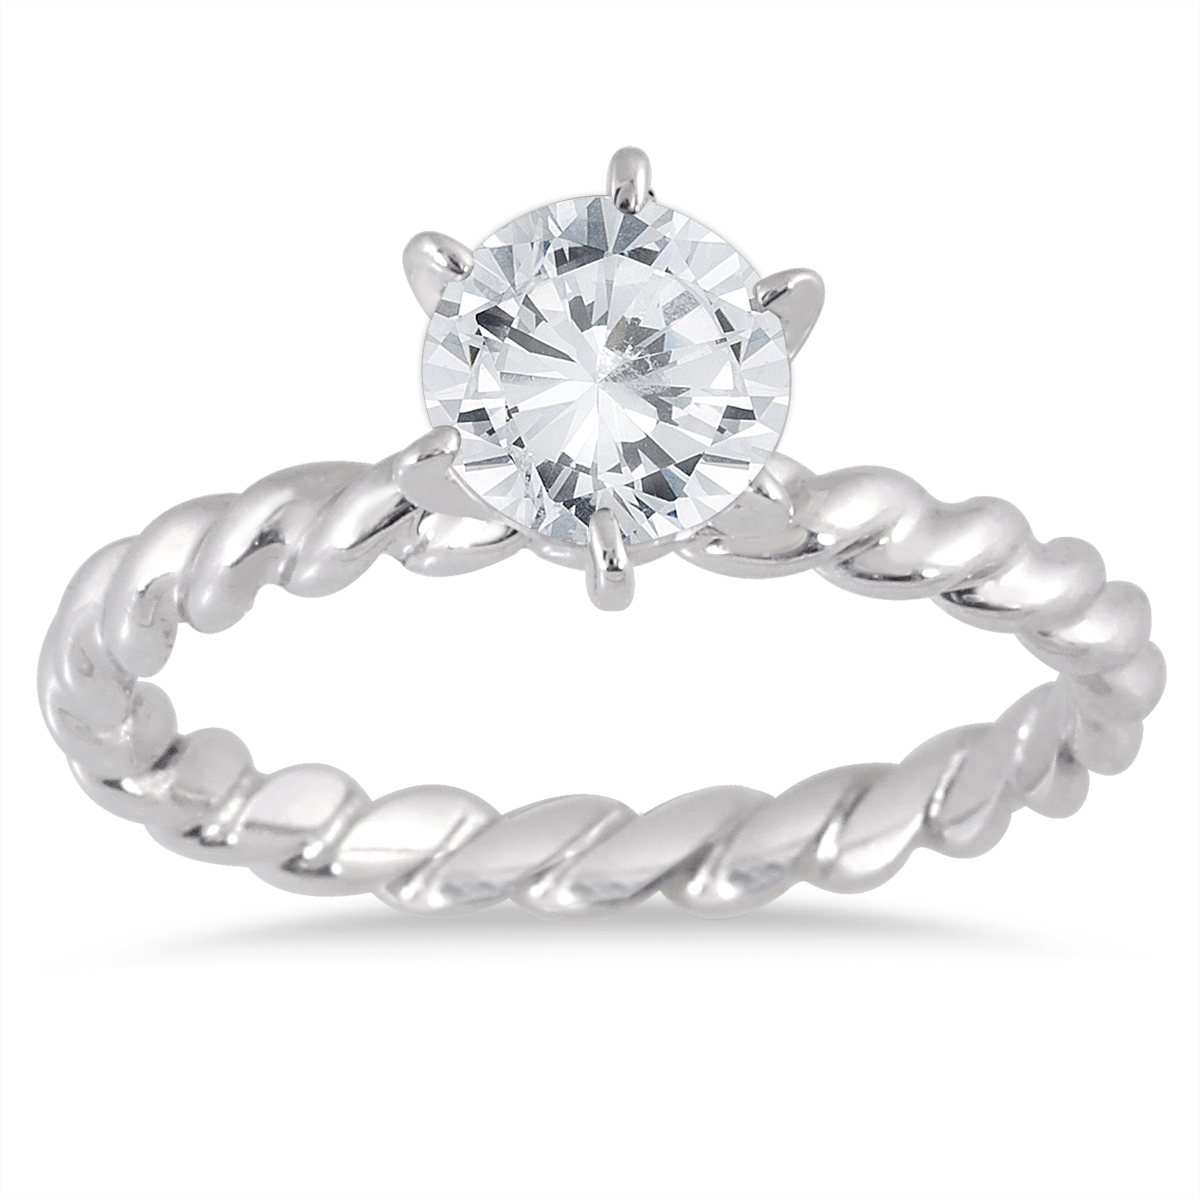 AGS Certified 1 Carat Braided Solitaire Diamond Ring in 14K White Gold (I-J Color, I2-I3 Clarity)